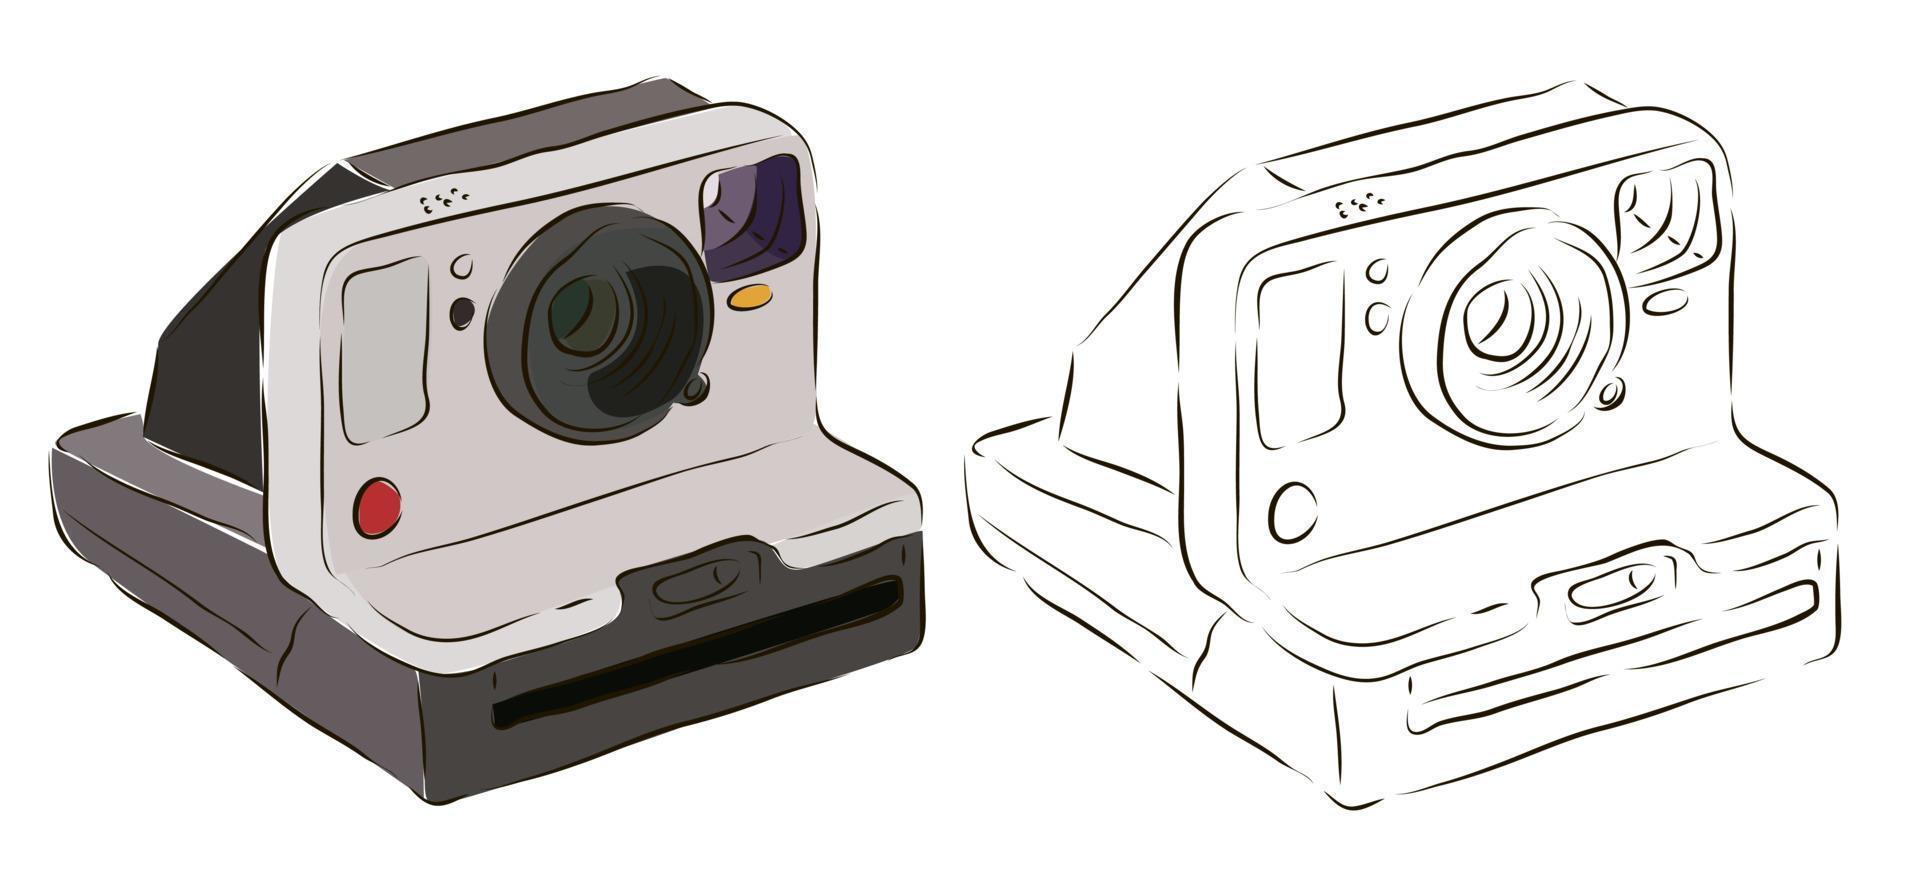 An old polaroid camera in color and in black and white. The concept of the old polaroid technique. vector